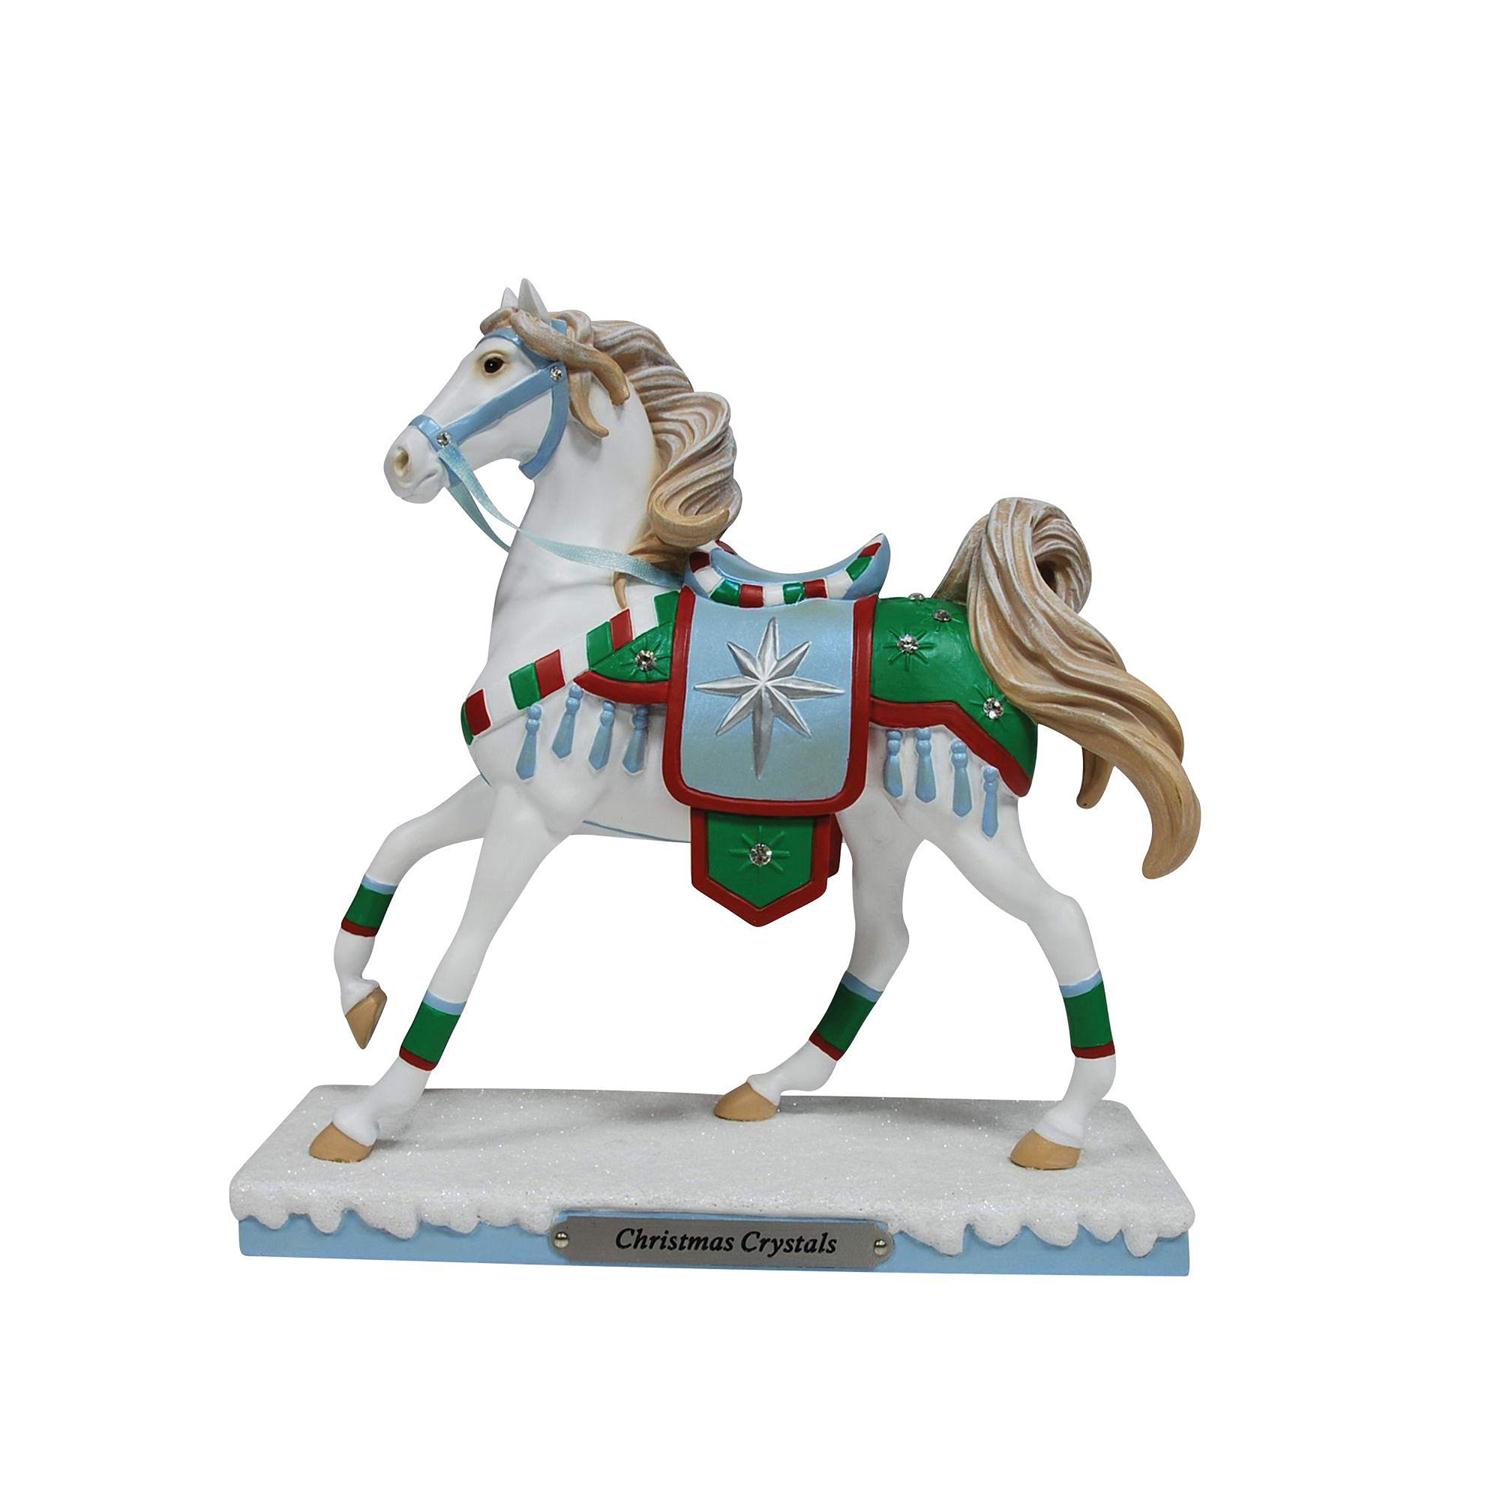 Enesco Gifts Trail Of Painted Ponies Christmas Crystals Horse Figurine Free Shipping Iveys Gifts And Decor